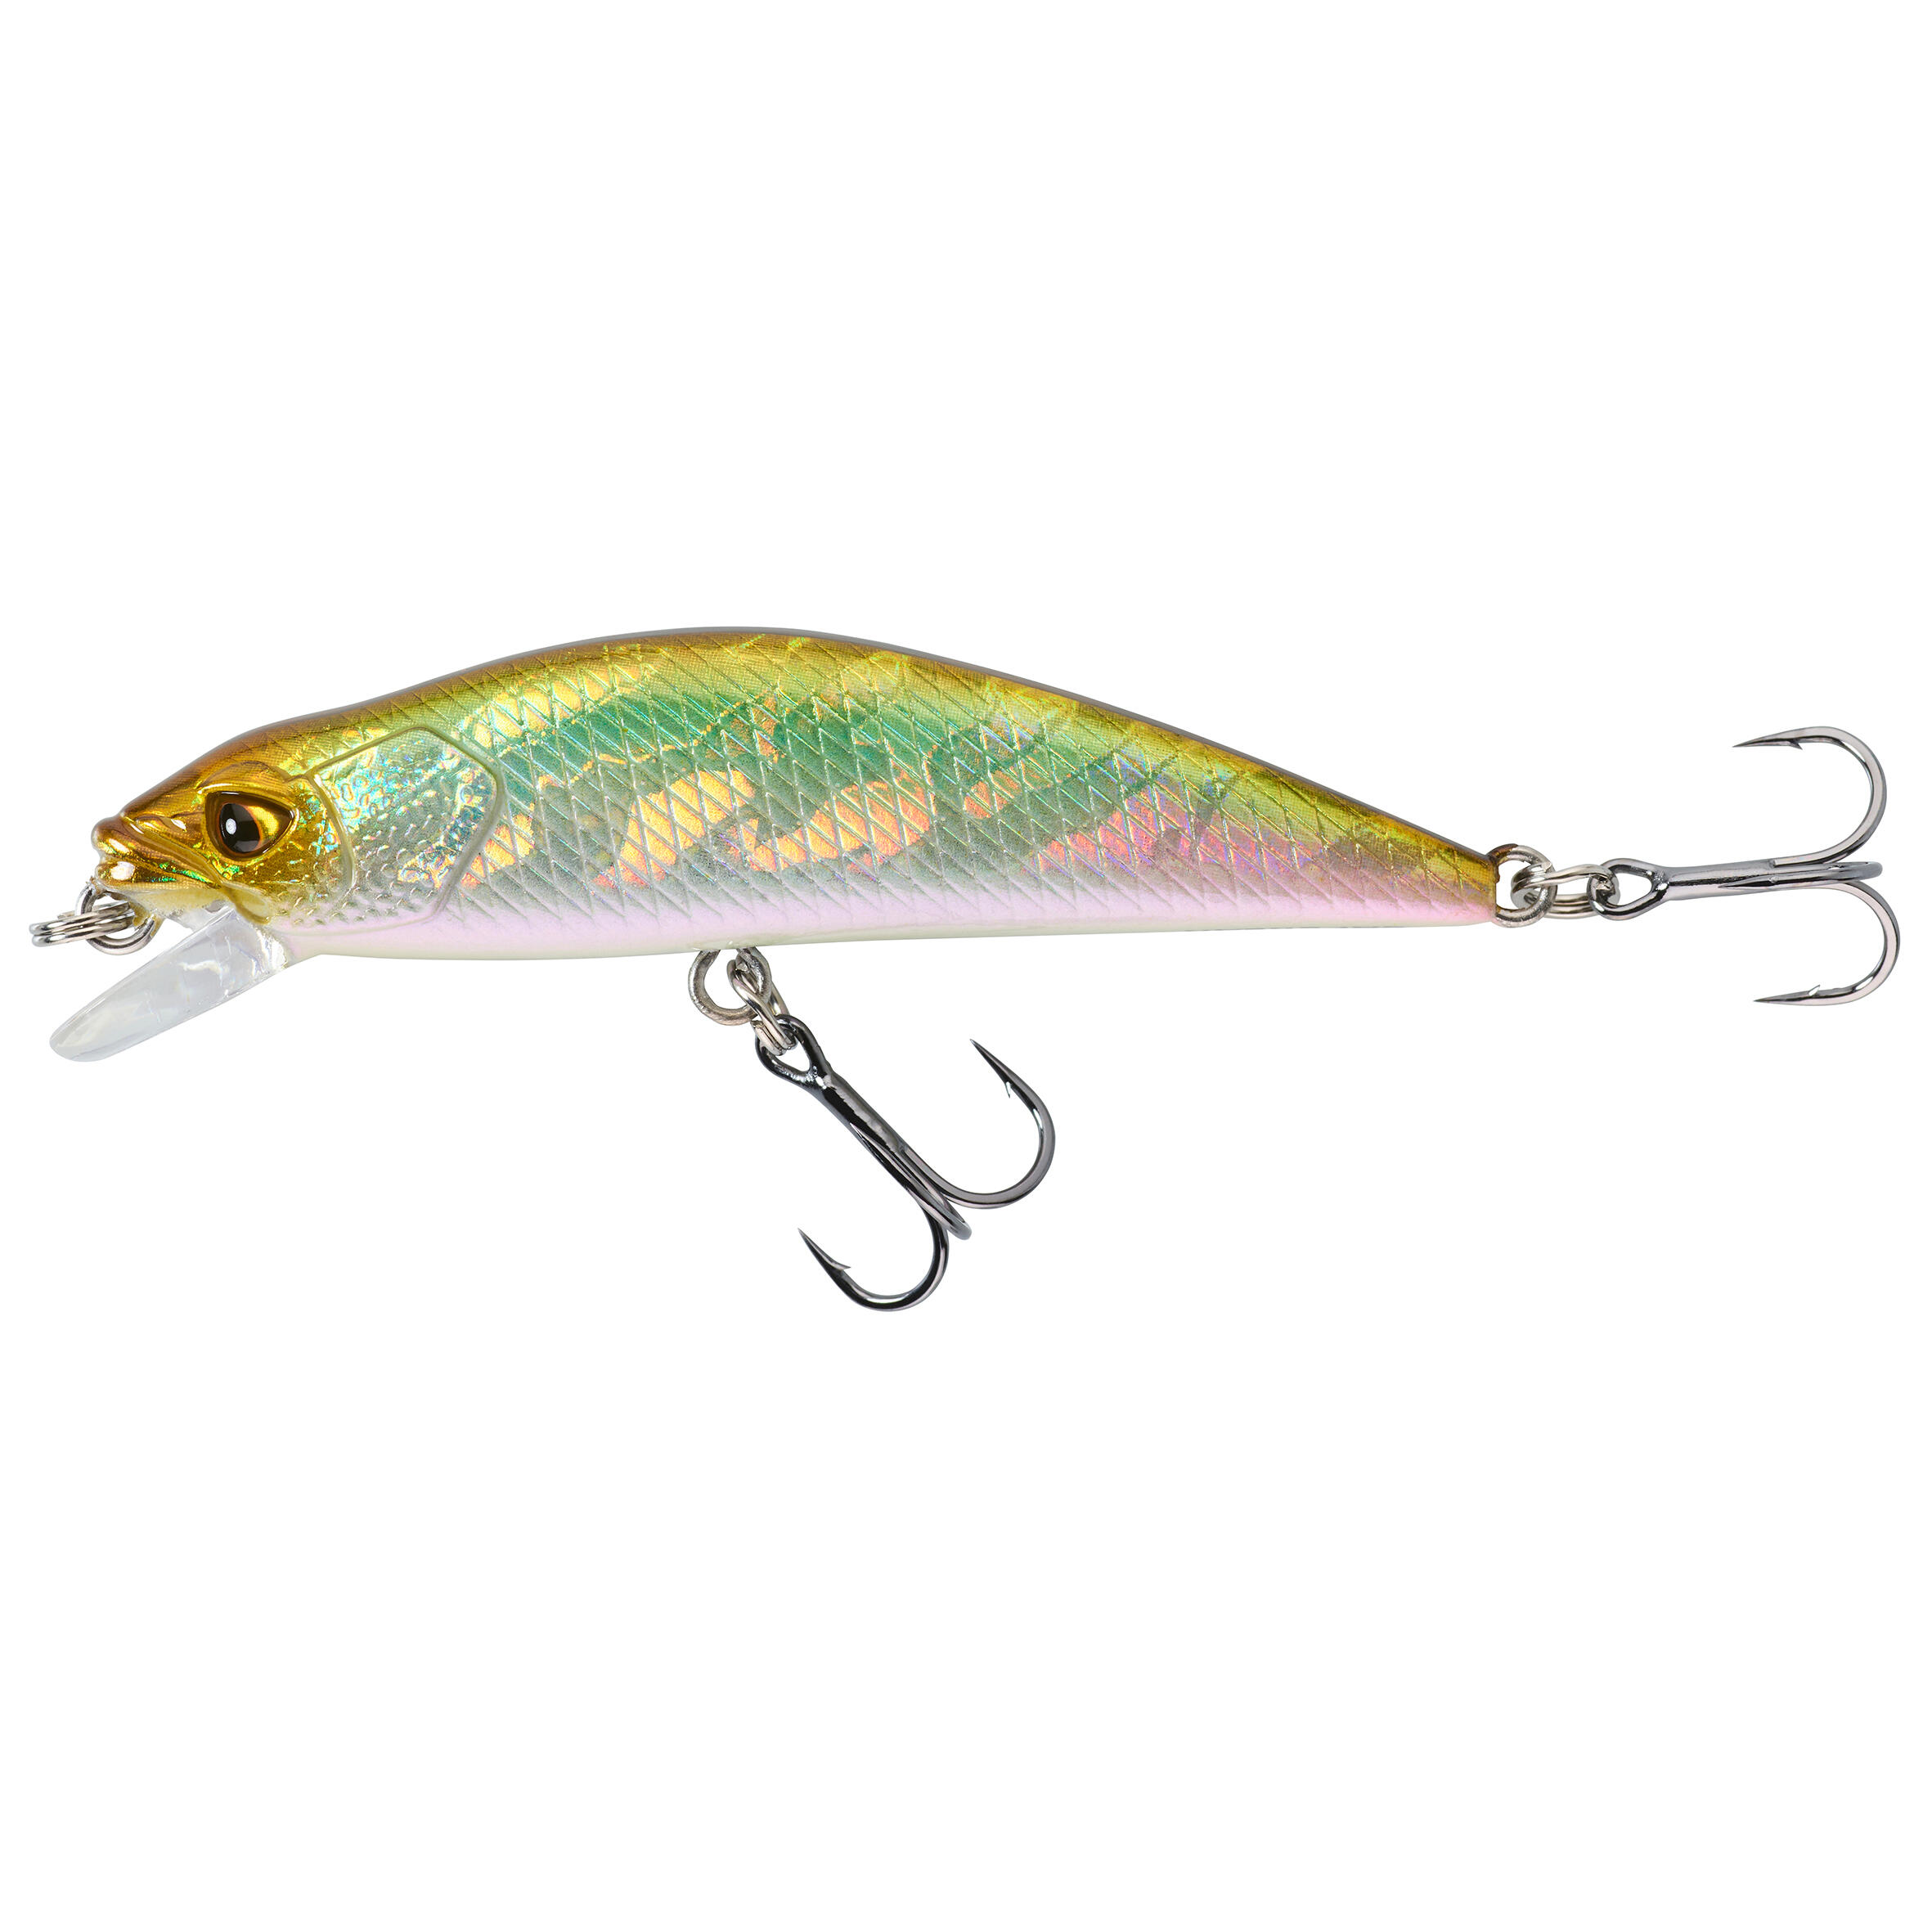 MINNOW HARD LURE FOR TROUT WXM  MNWFS 65 US - GREEN BACK 1/1